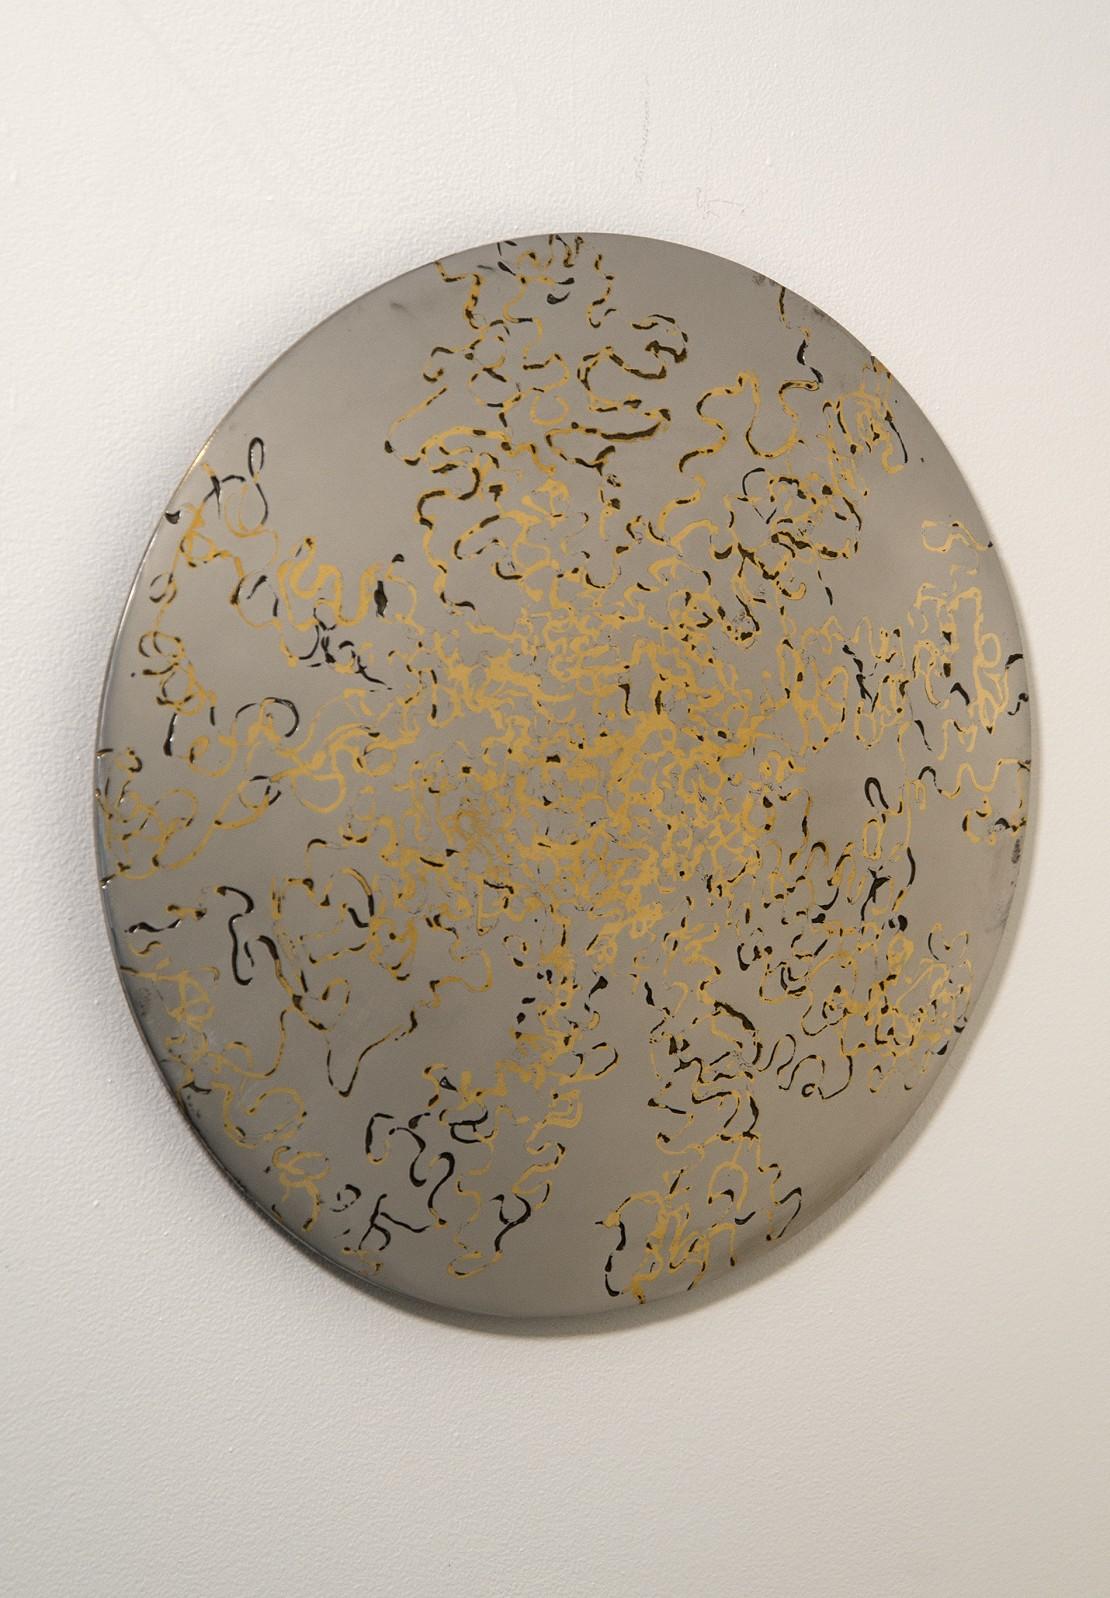 Reflecting Nature Series No 1 - polished stainless steel, copper, wall sculpture For Sale 3